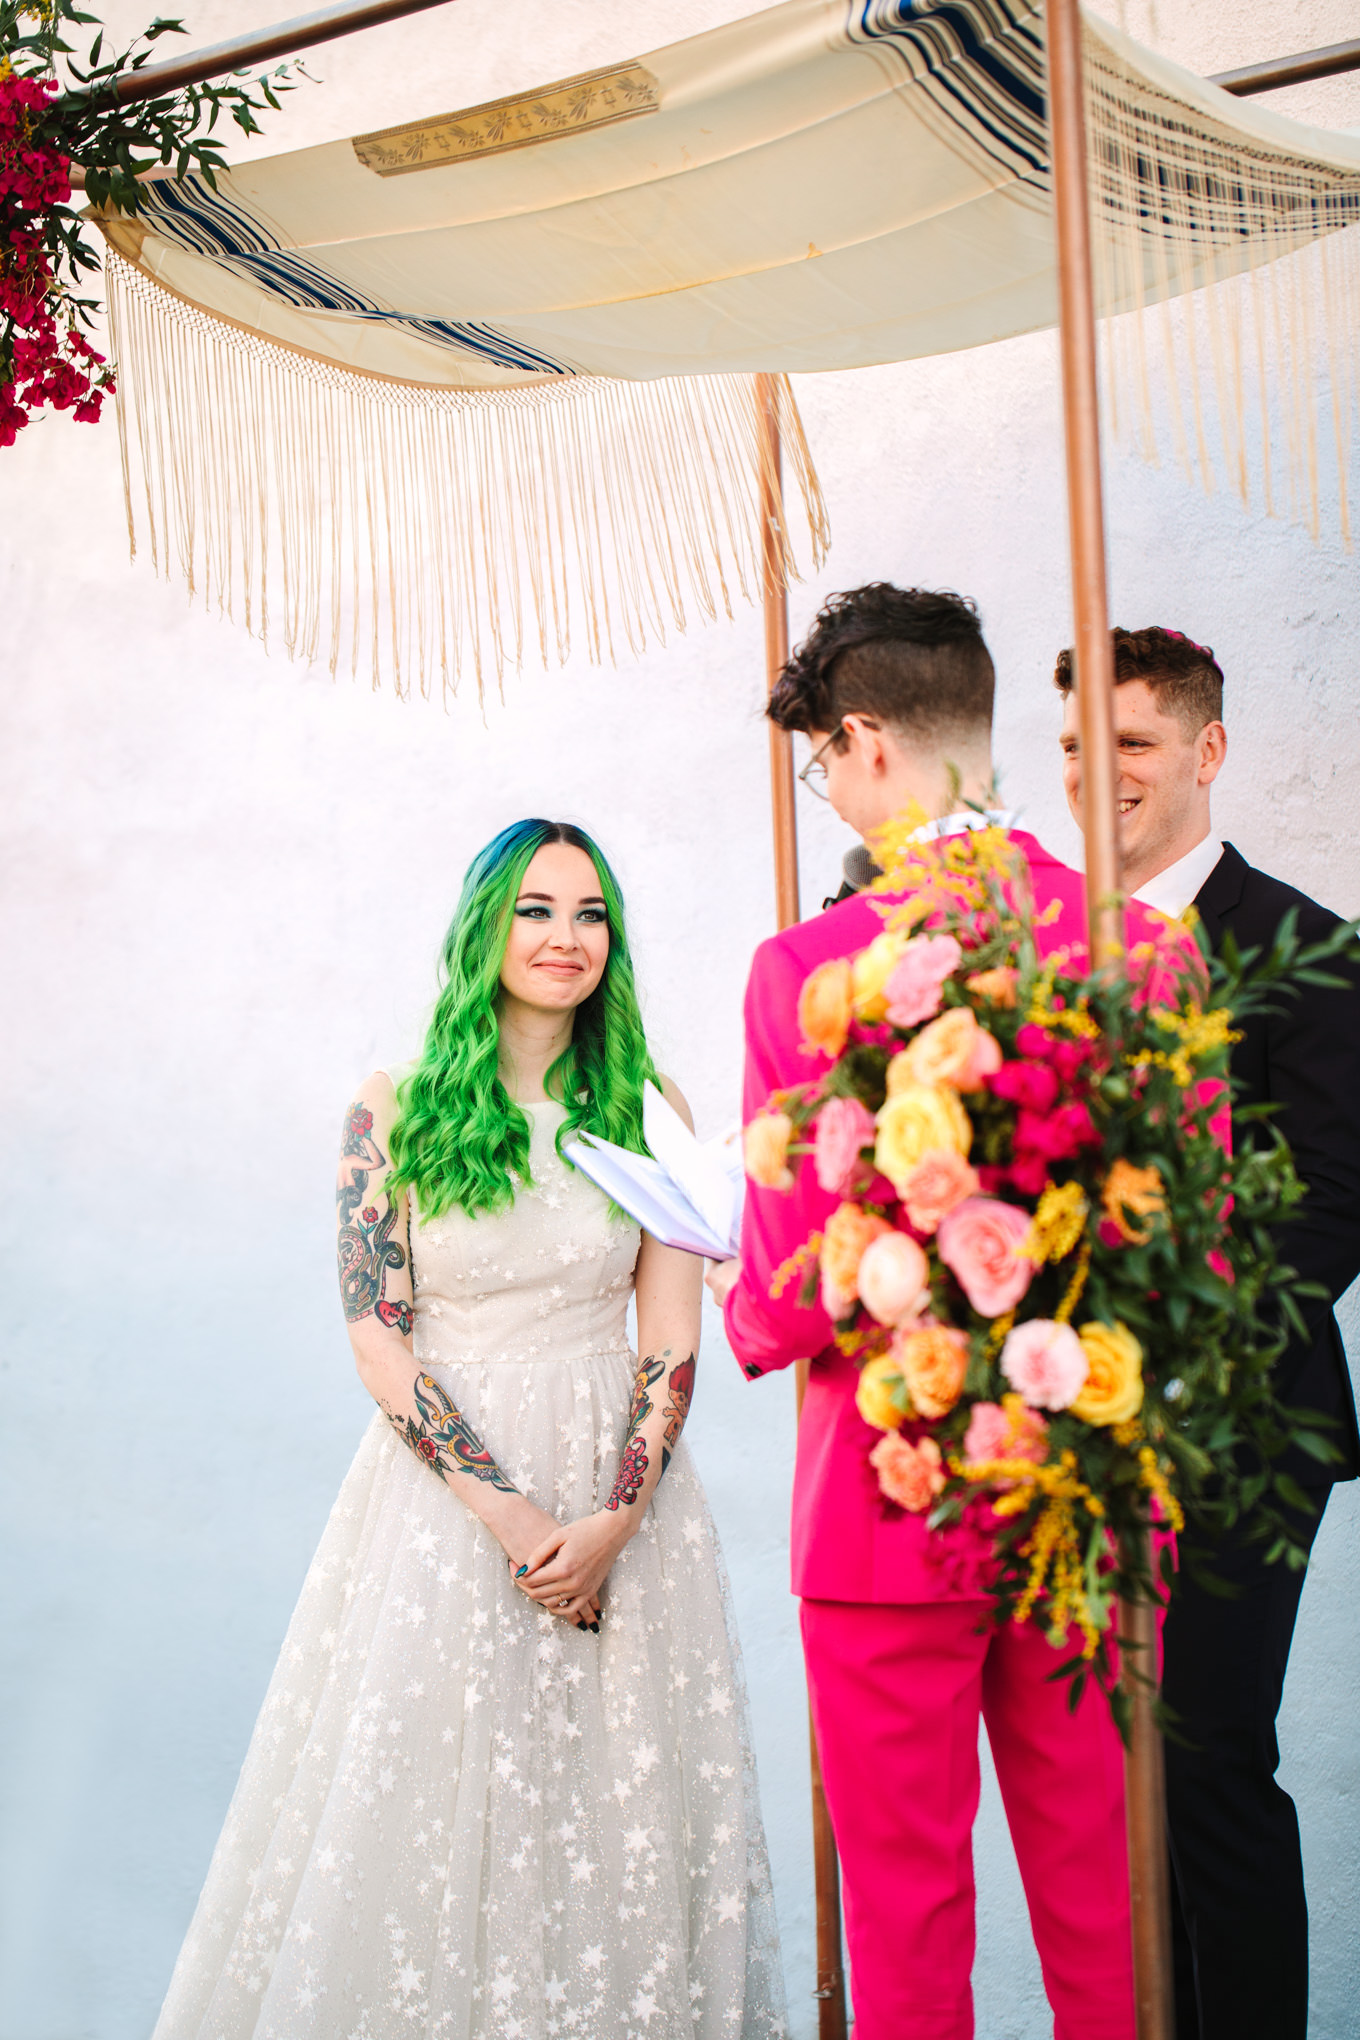 Bride with green hair listening to wedding vows | Colorful wedding at The Unique Space Los Angeles published in The Knot Magazine | Fresh and colorful photography for fun-loving couples in Southern California | #colorfulwedding #losangeleswedding #weddingphotography #uniquespace Source: Mary Costa Photography | Los Angeles